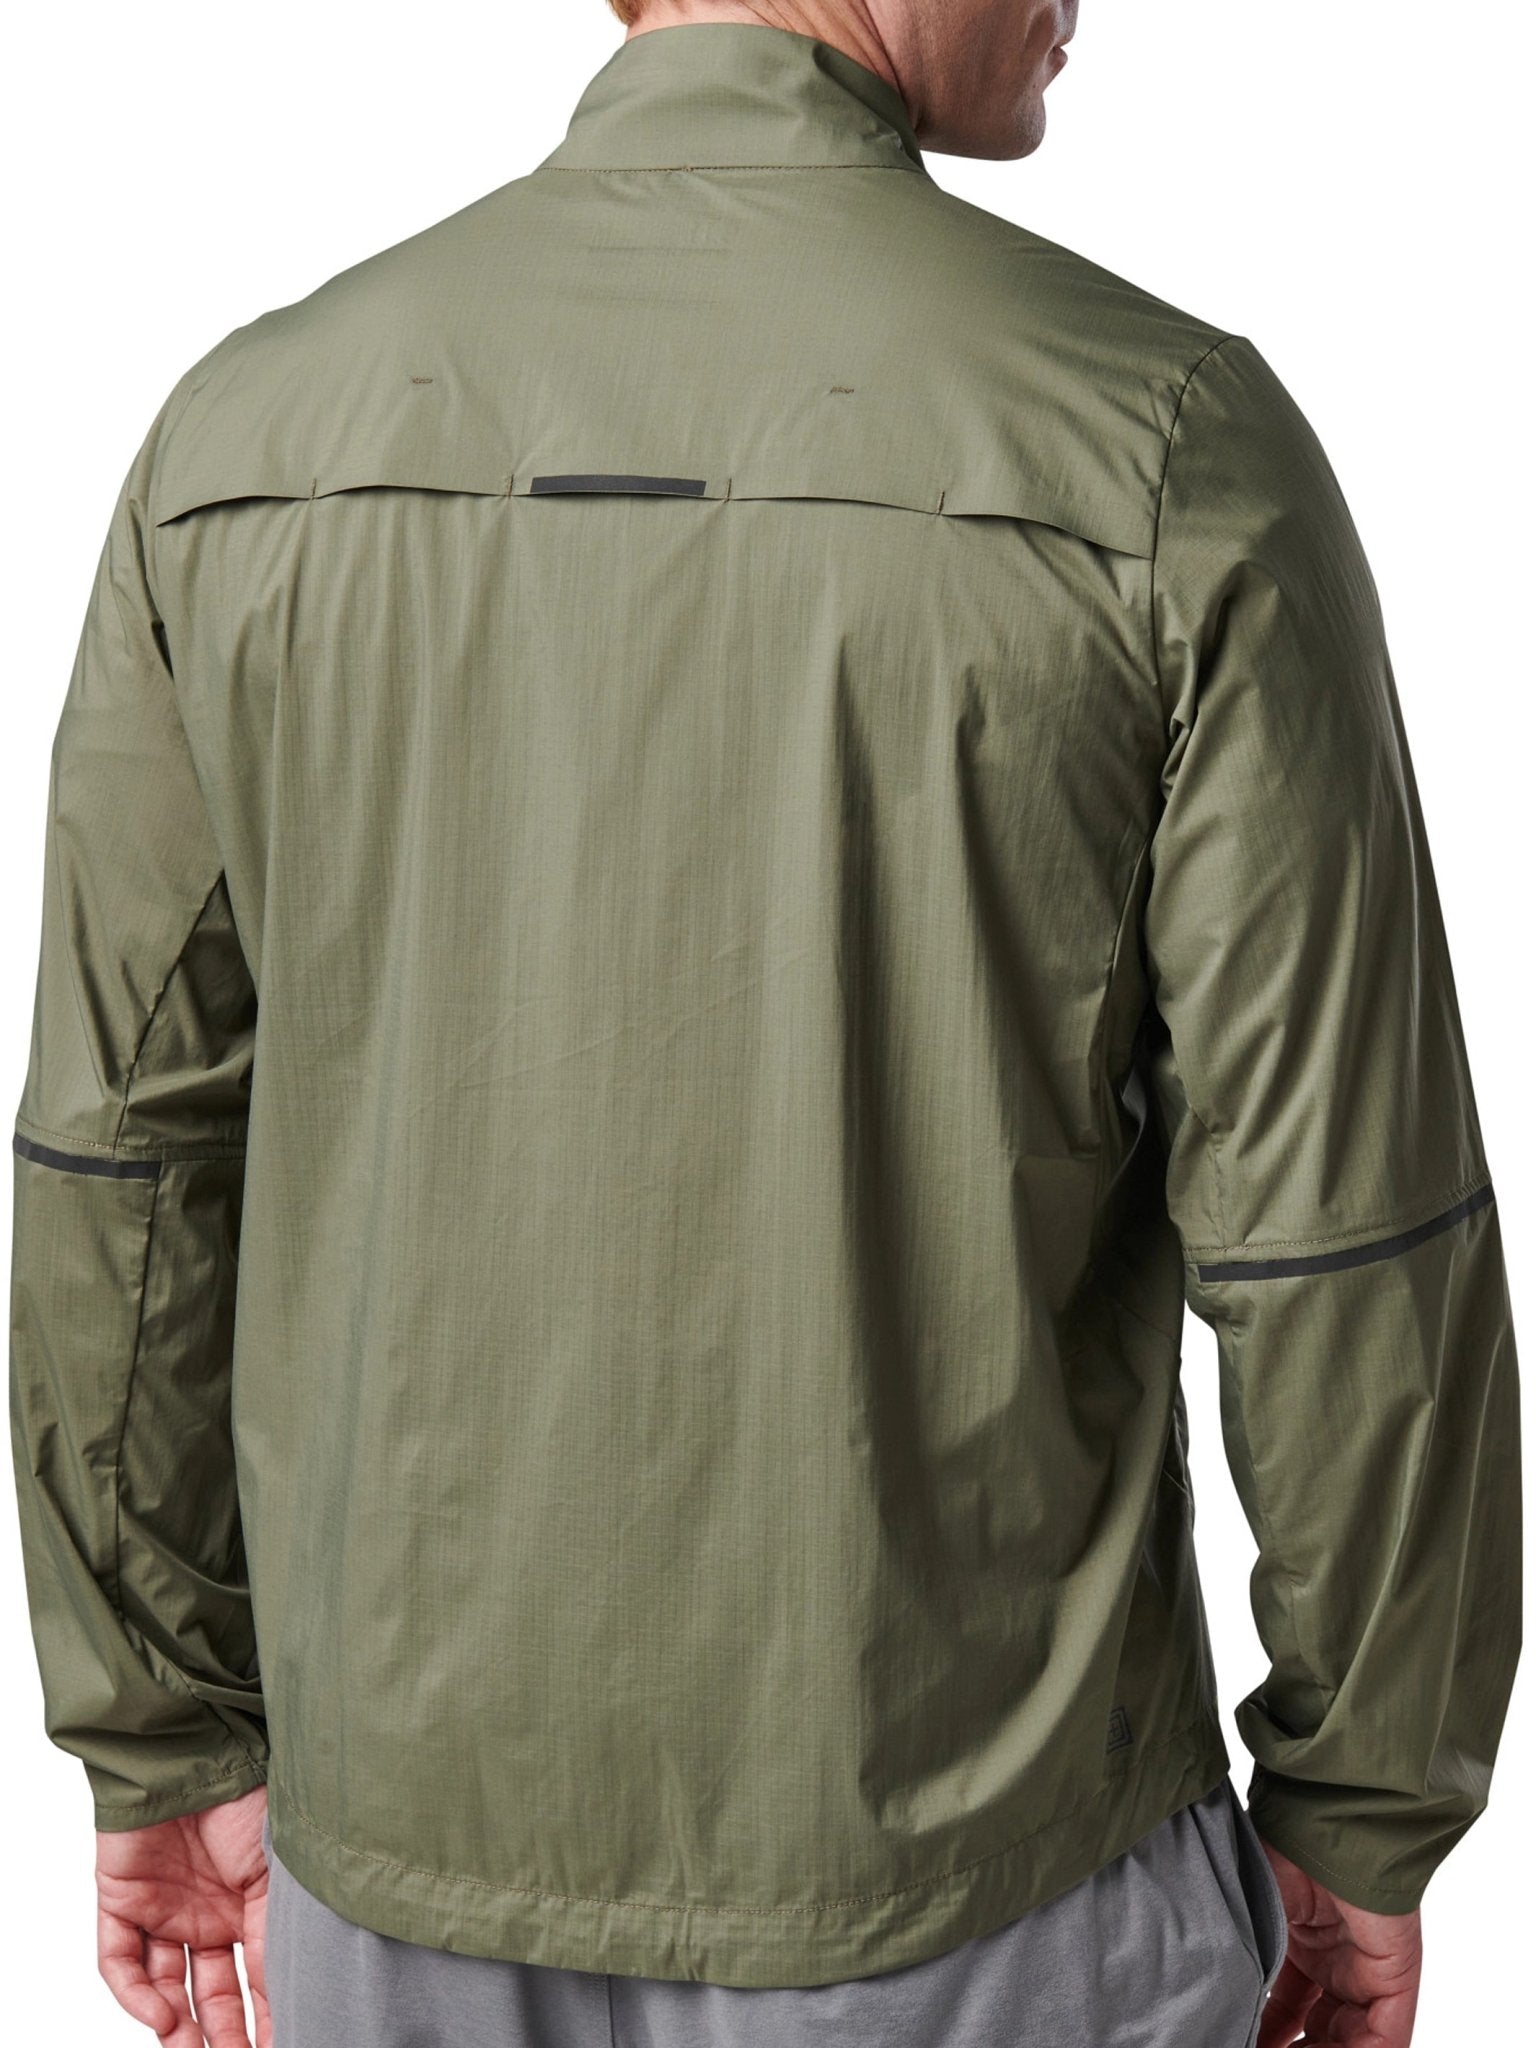 4elementsclothing5.11 Tactical5.11 Tactical - PT-R PACKABLE JACKET - Nylon Mini Ripstop - Style 82140Coats & Jackets82140-963-S